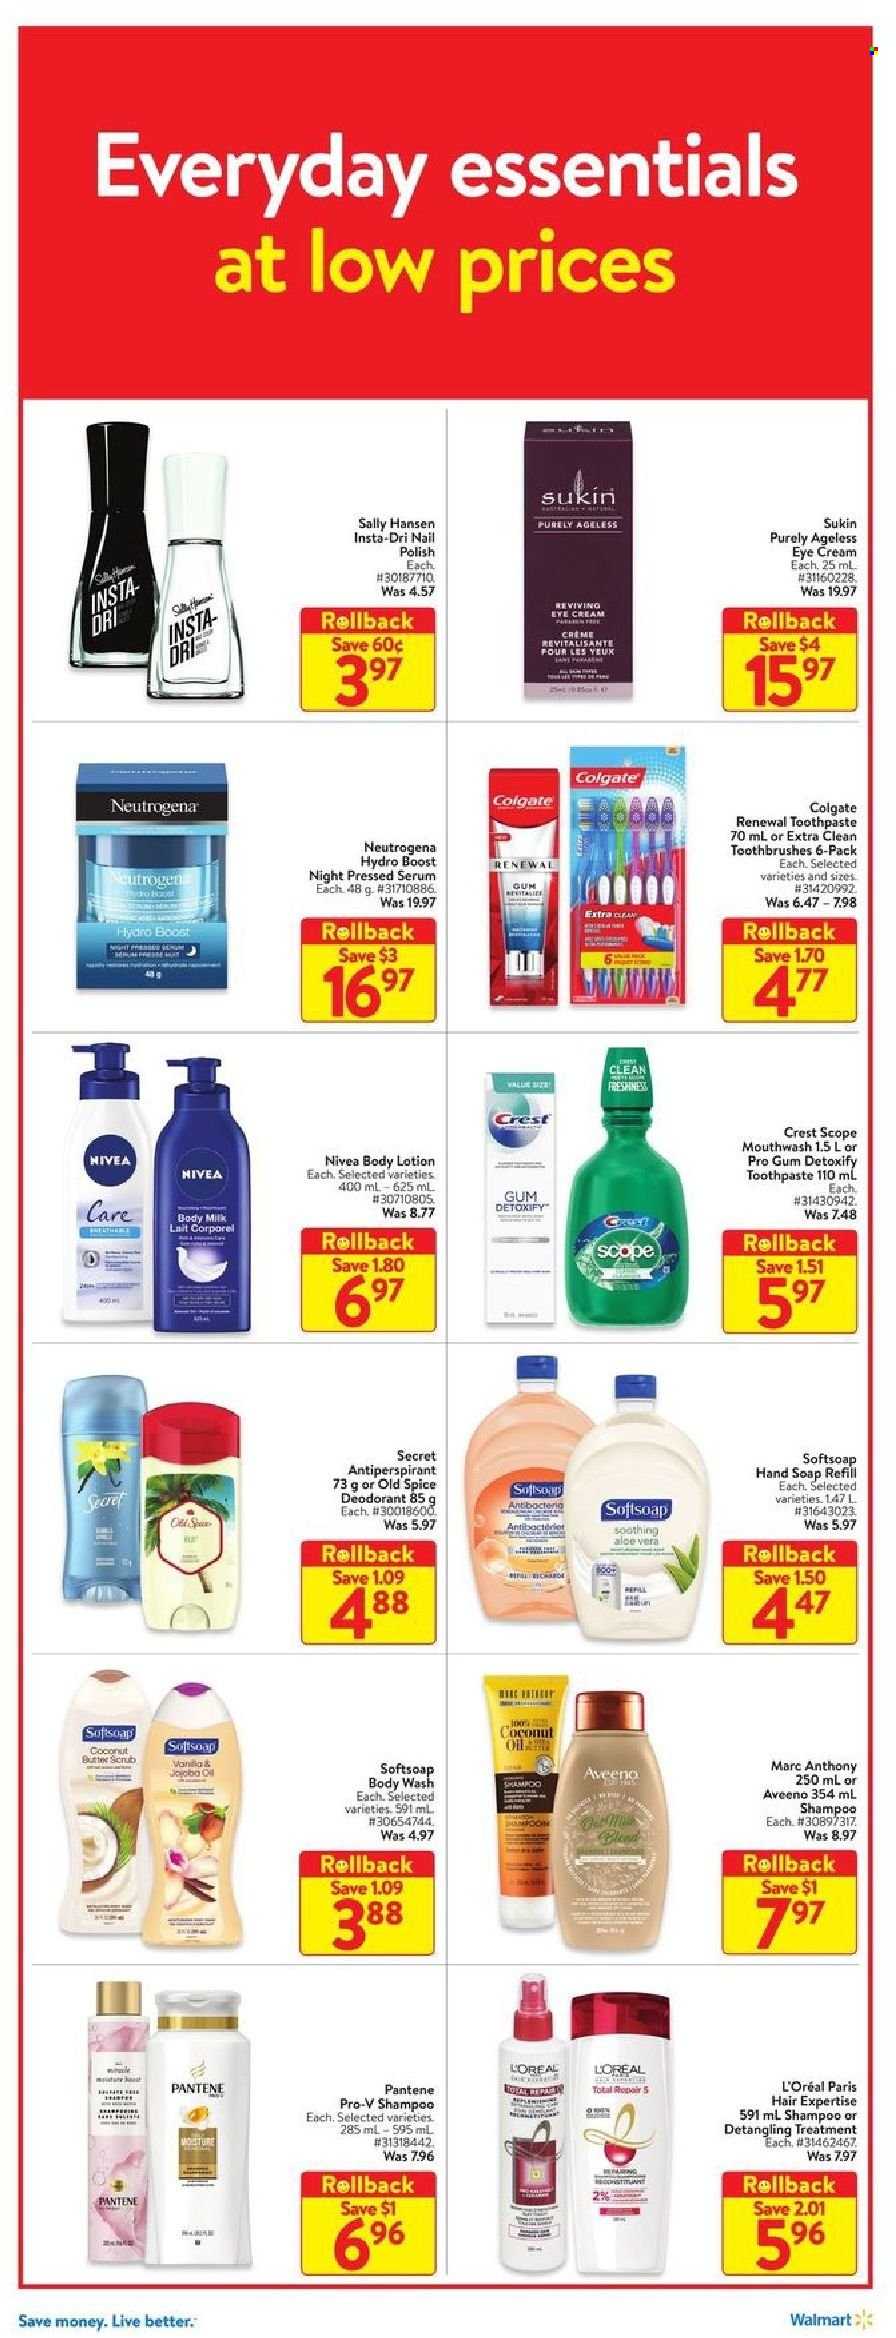 thumbnail - Walmart Flyer - October 07, 2021 - October 13, 2021 - Sales products - spice, coconut oil, oil, Boost, L'Or, Aveeno, body wash, Softsoap, hand soap, soap, toothpaste, mouthwash, Crest, L’Oréal, serum, eye cream, Sukin, body lotion, body milk, anti-perspirant, polish, scope, Colgate, Neutrogena, Sally Hansen, shampoo, Pantene, Nivea, Old Spice. Page 10.